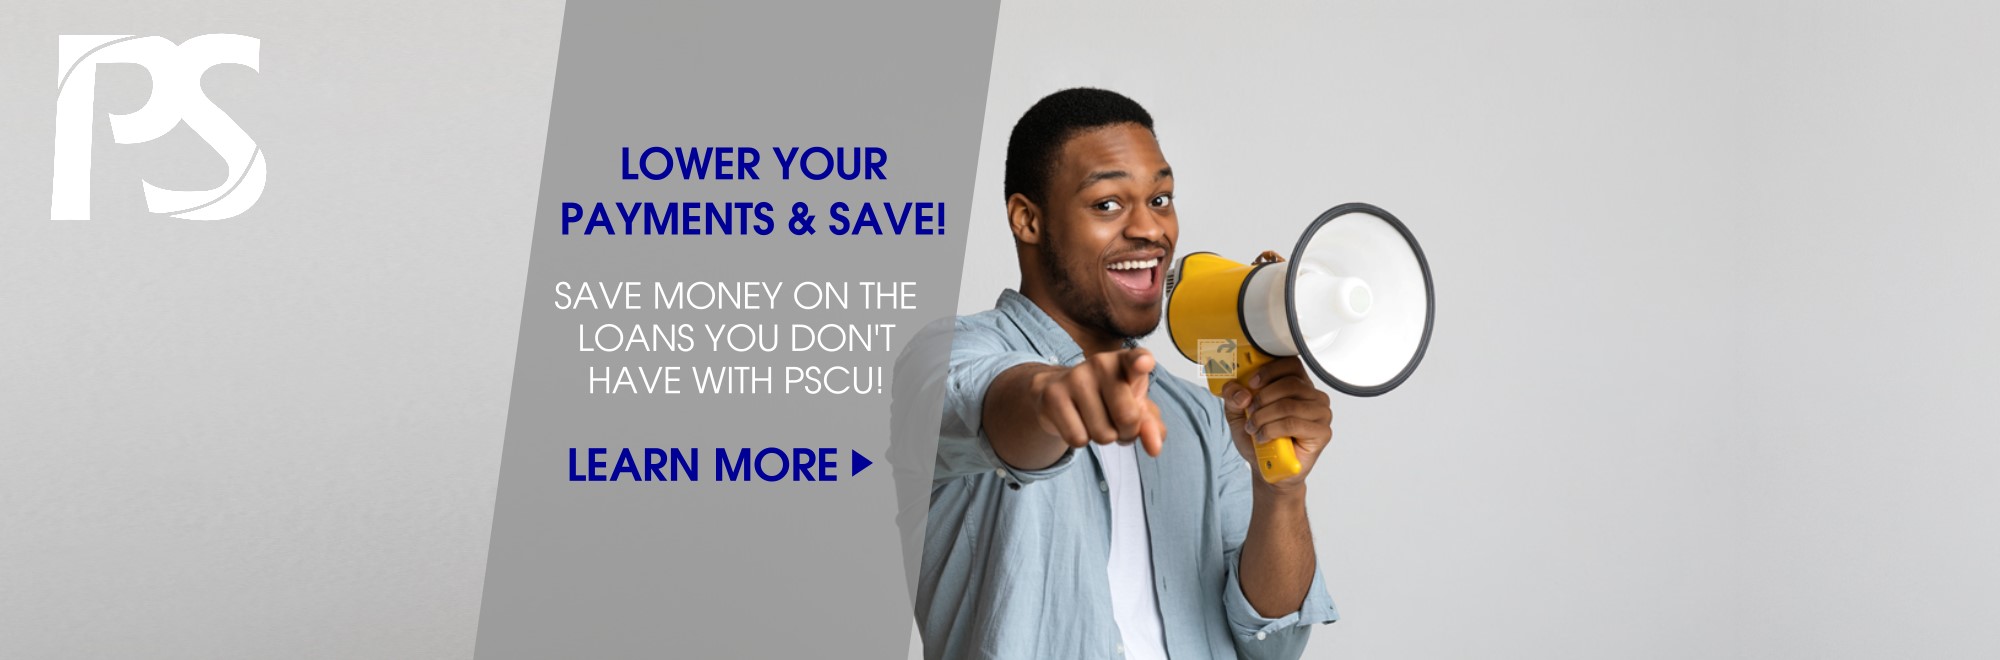 Lower your payments & Save! Save money on the loans you don't have with PSCU! Learn more.